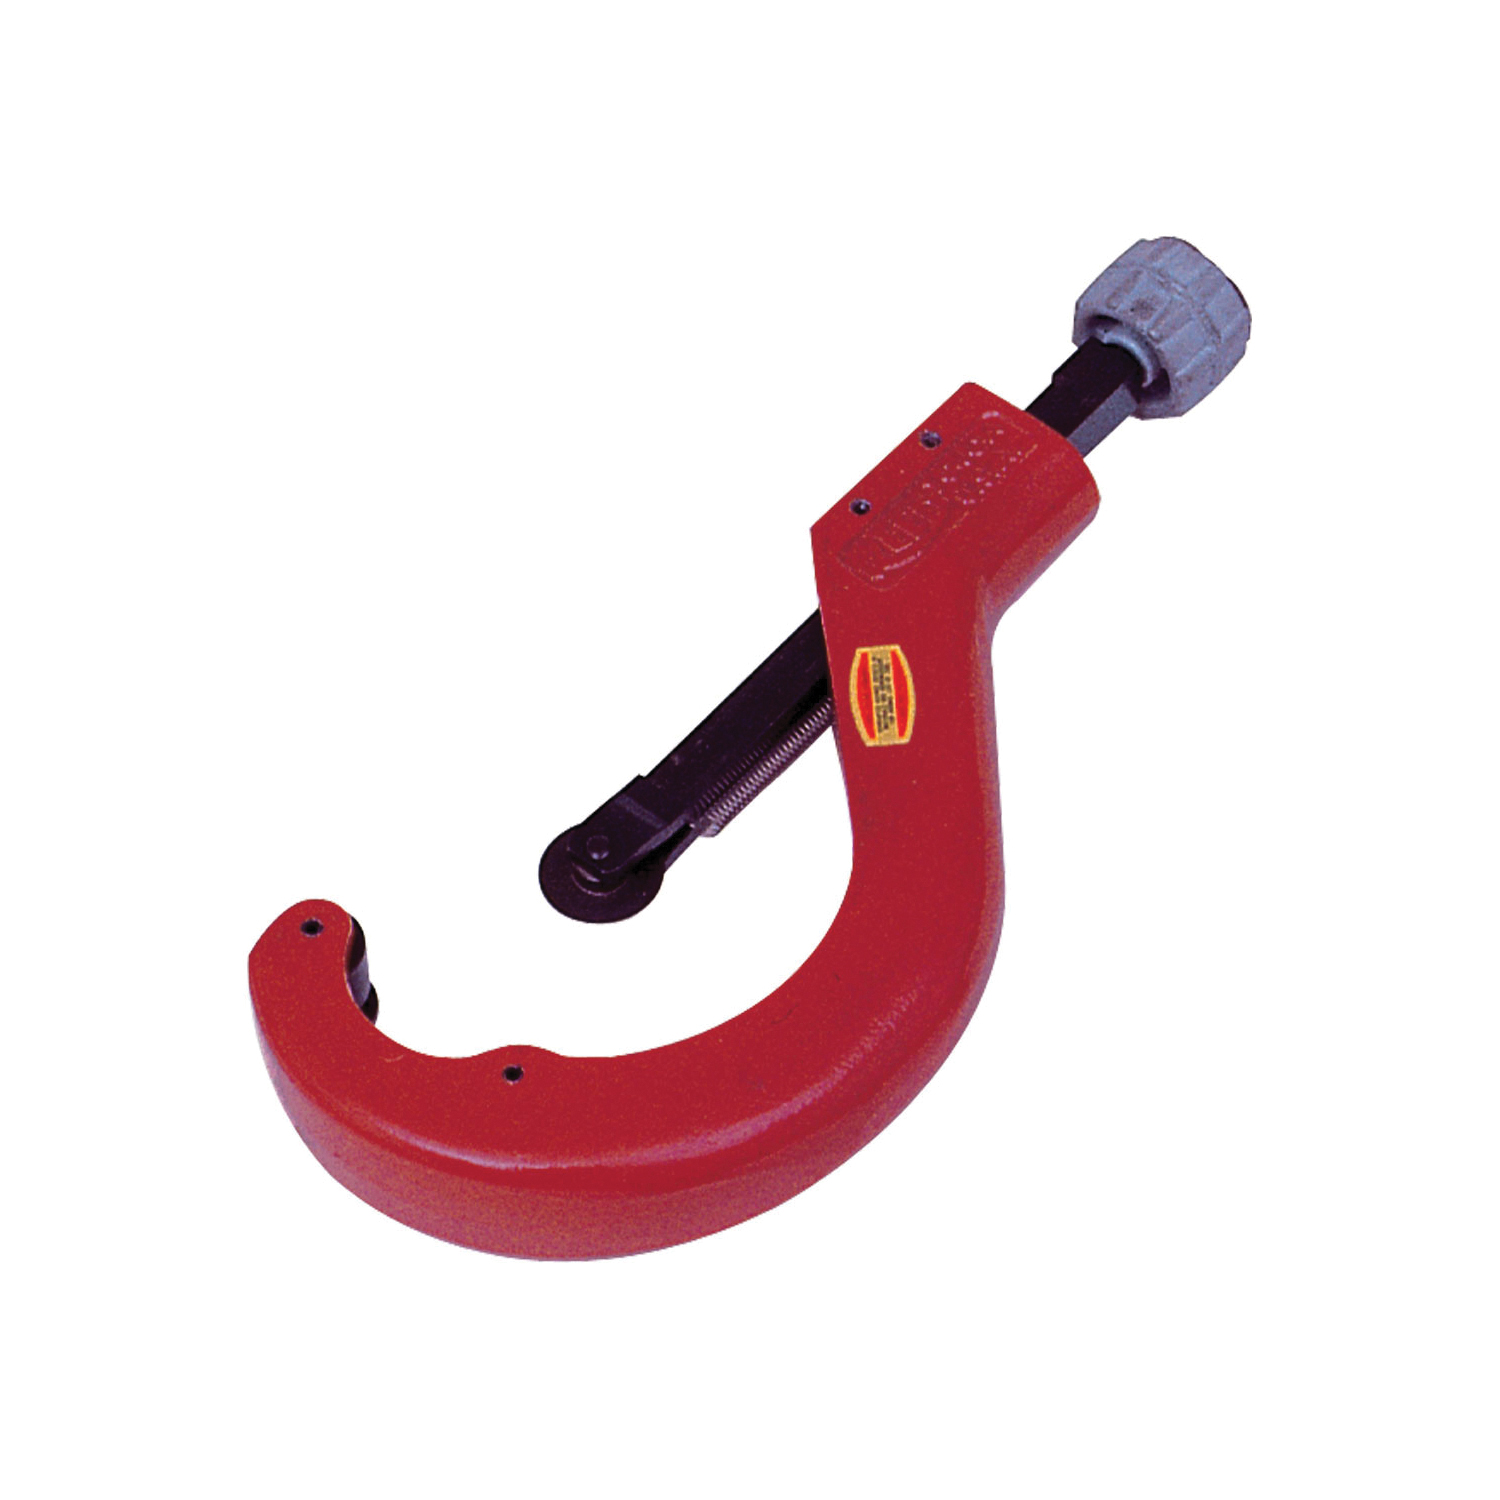 Reed Quick Release™ 03440 Tubing Cutter, 1-7/8 to 4-1/2 in